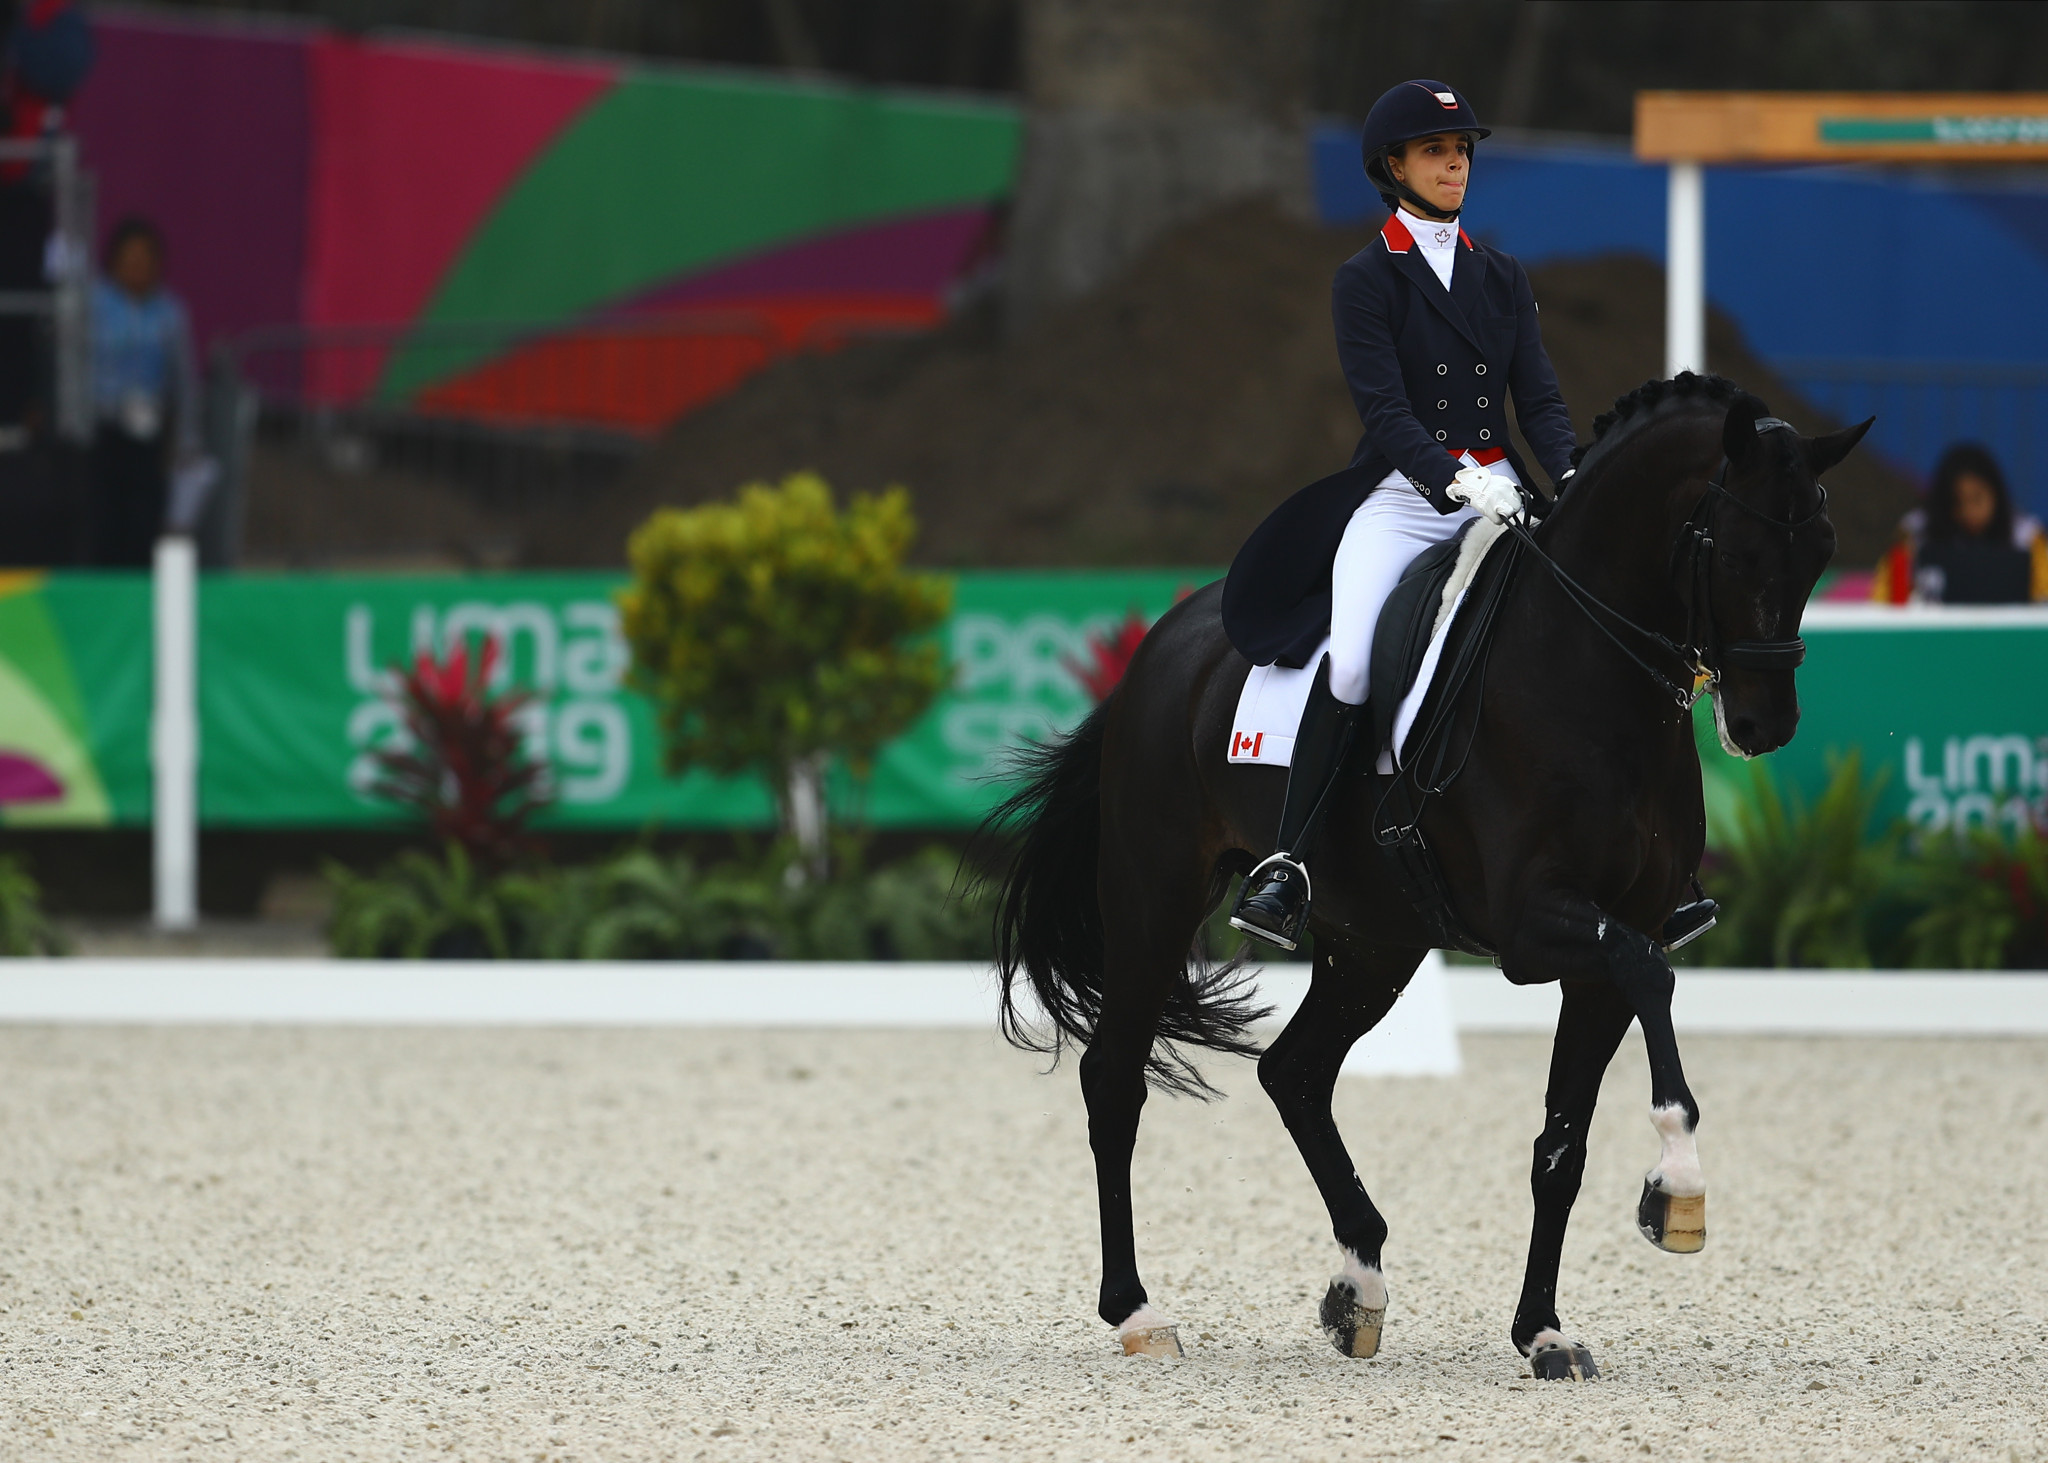 The FEI have reportedly expressed interest in staging competitions in Lima after the Pan American Games ©Getty Images